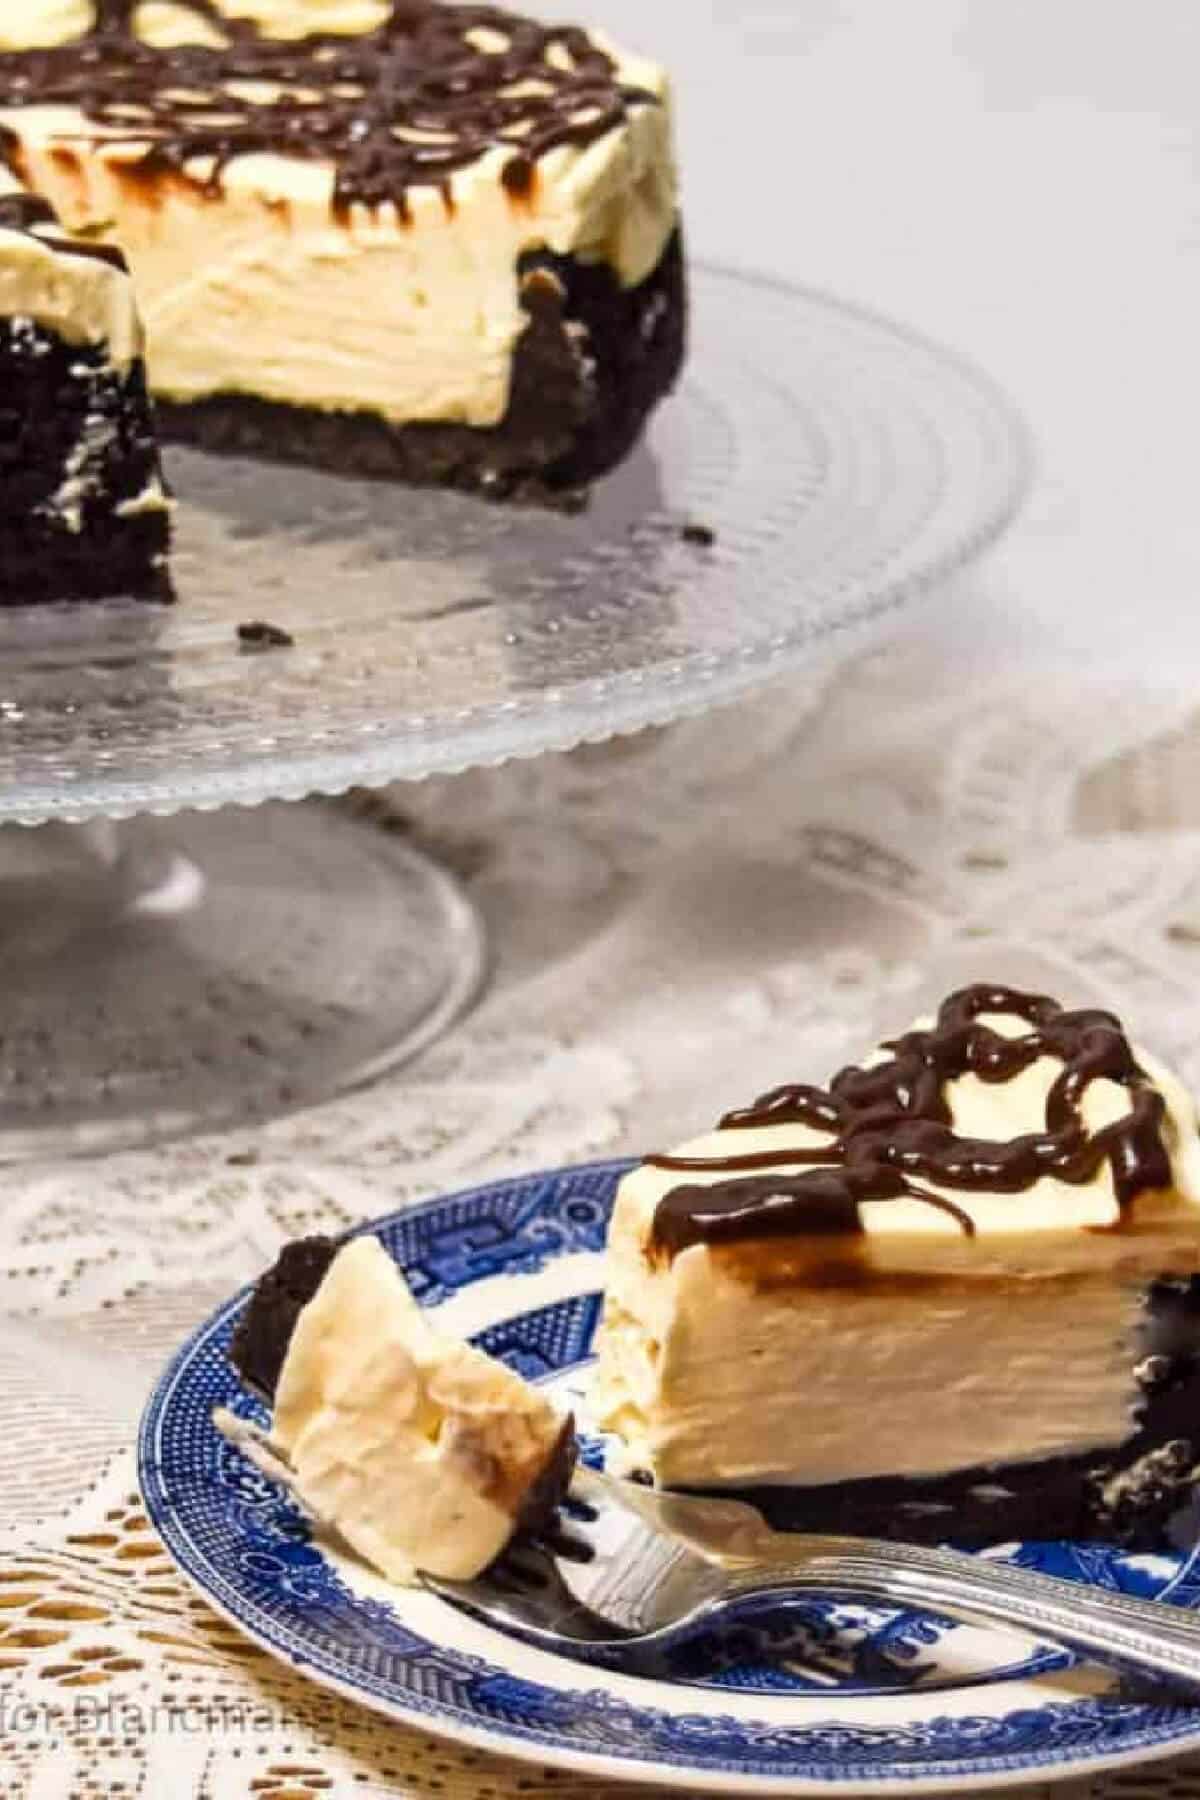 A slice of cheesecake on a plate with the rest of the cake in the background.